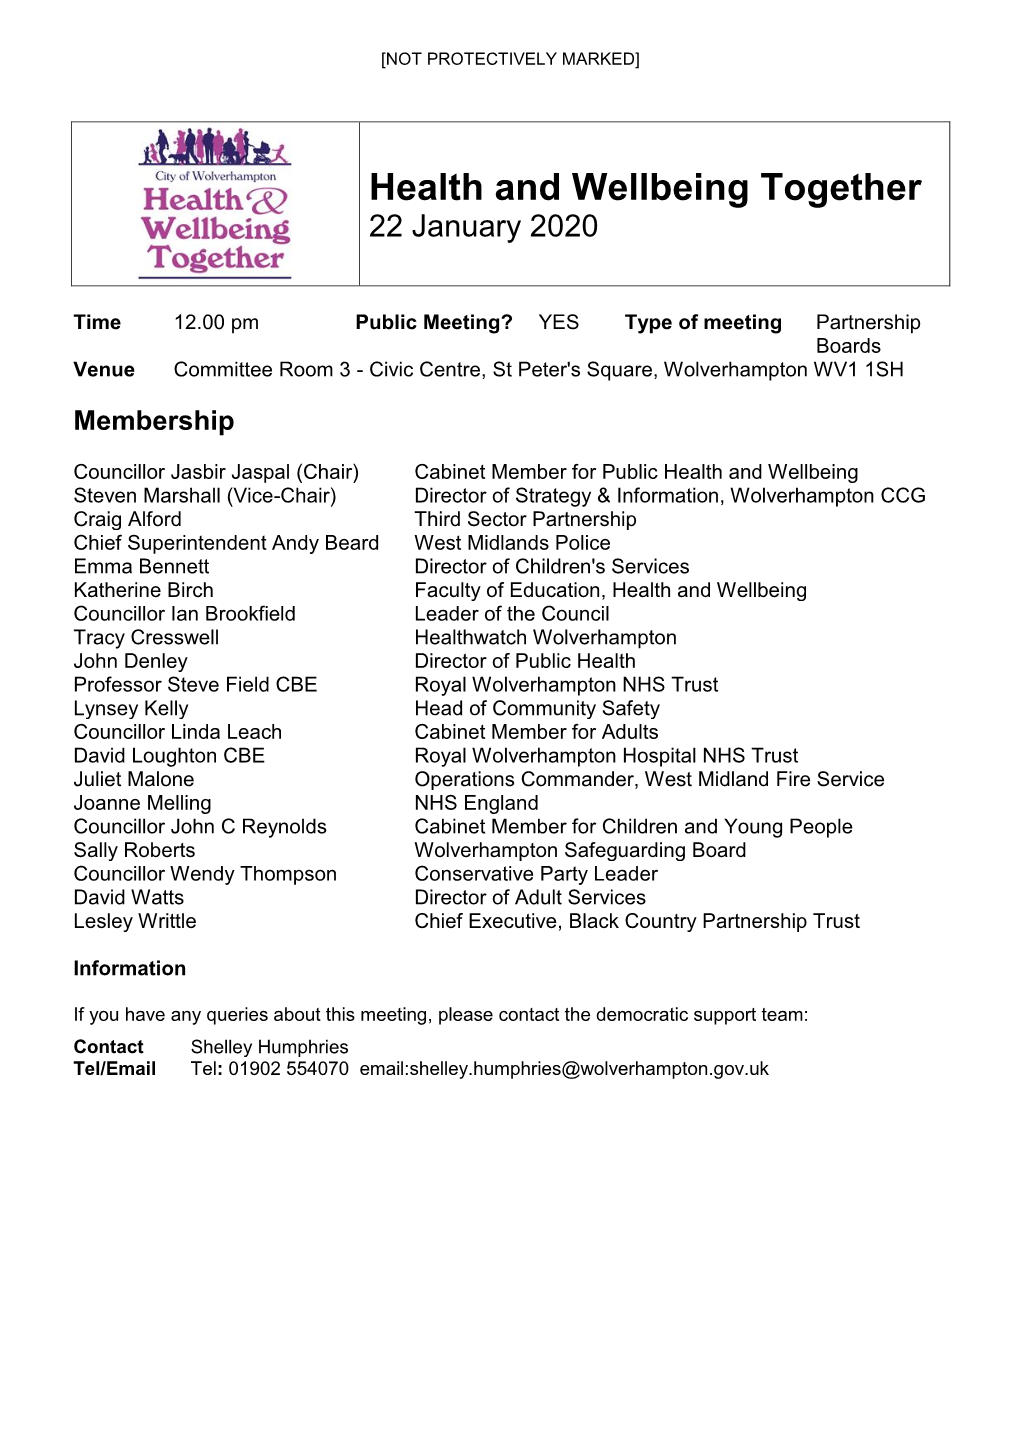 Health and Wellbeing Together 22 January 2020